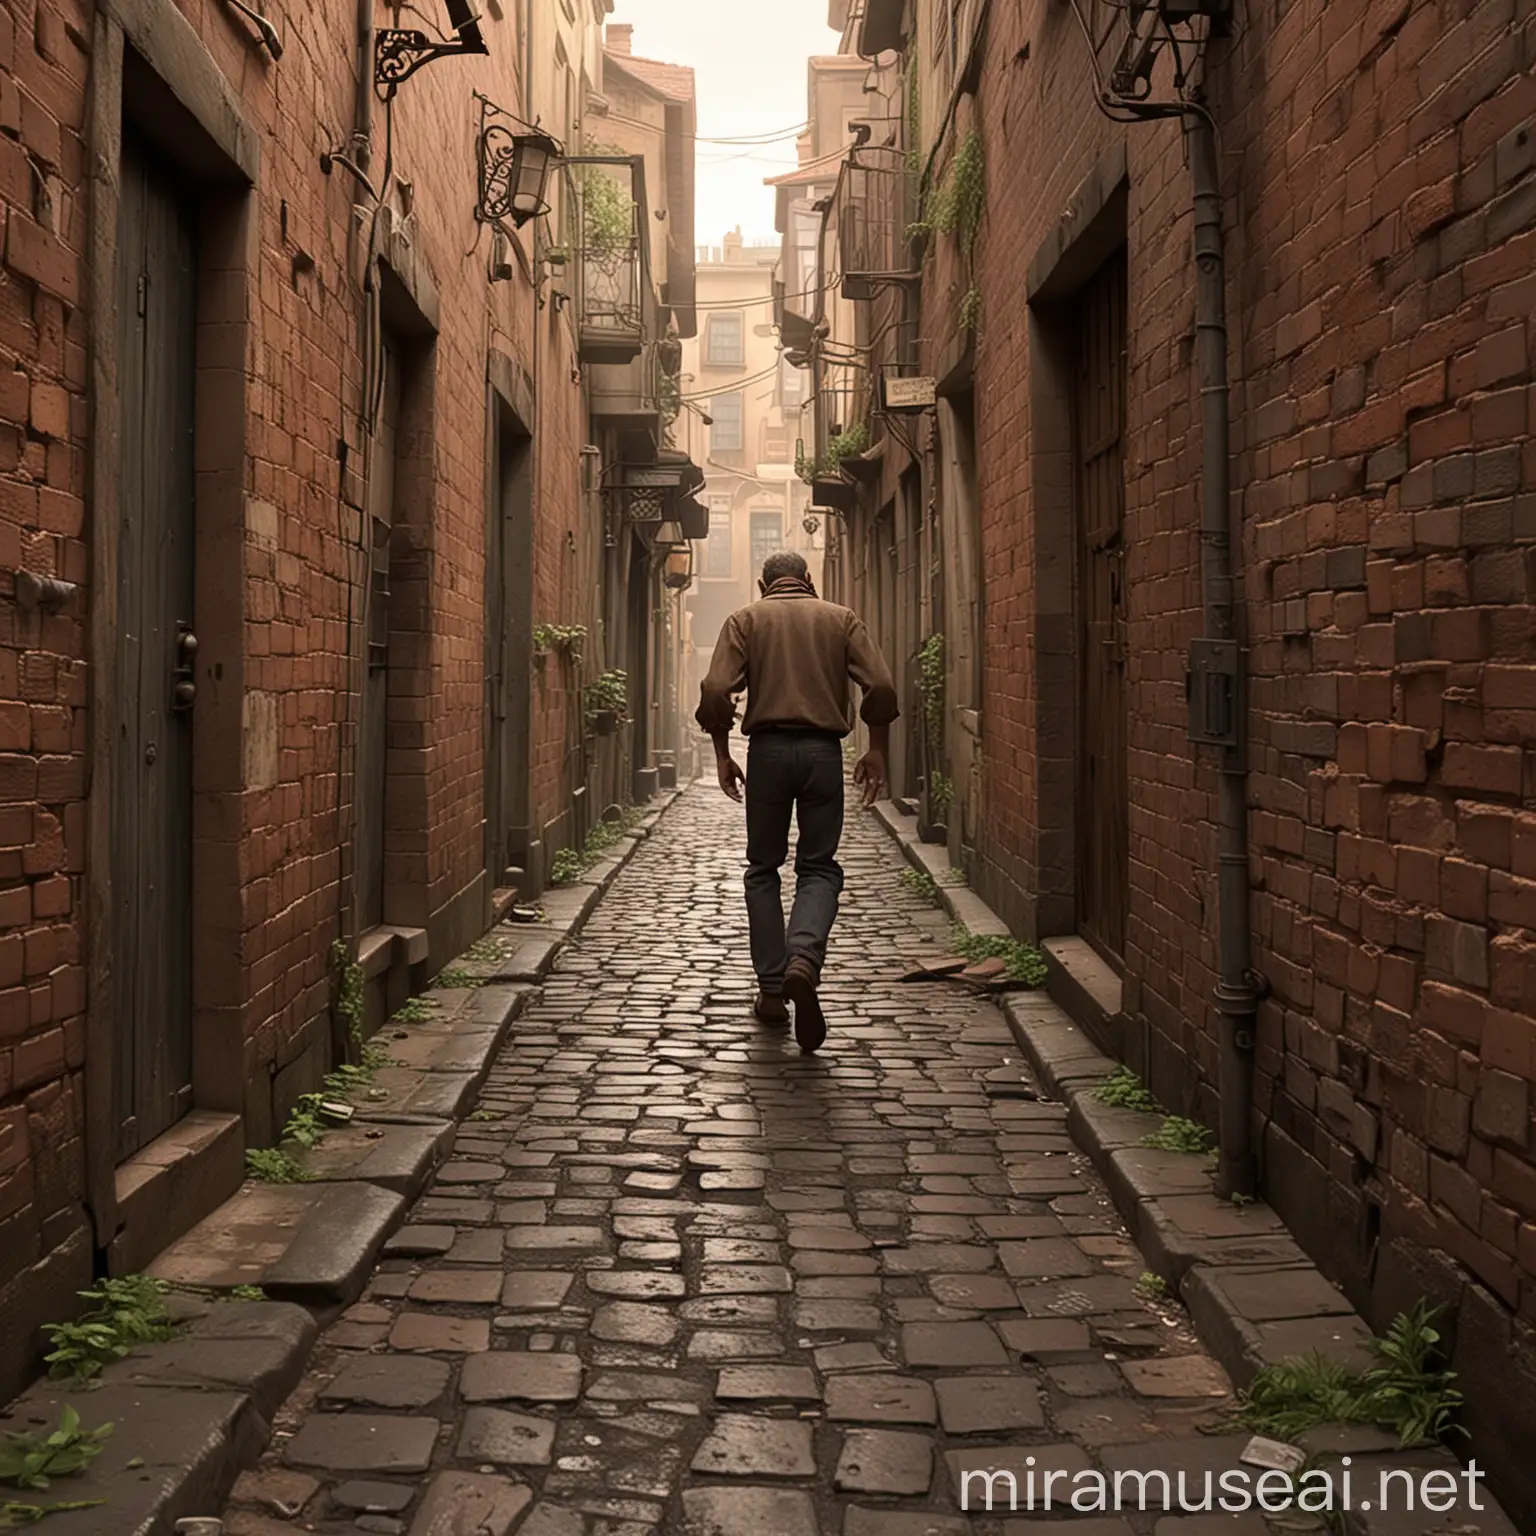 A distressed man walked to the end of a small alley，disney pixar style